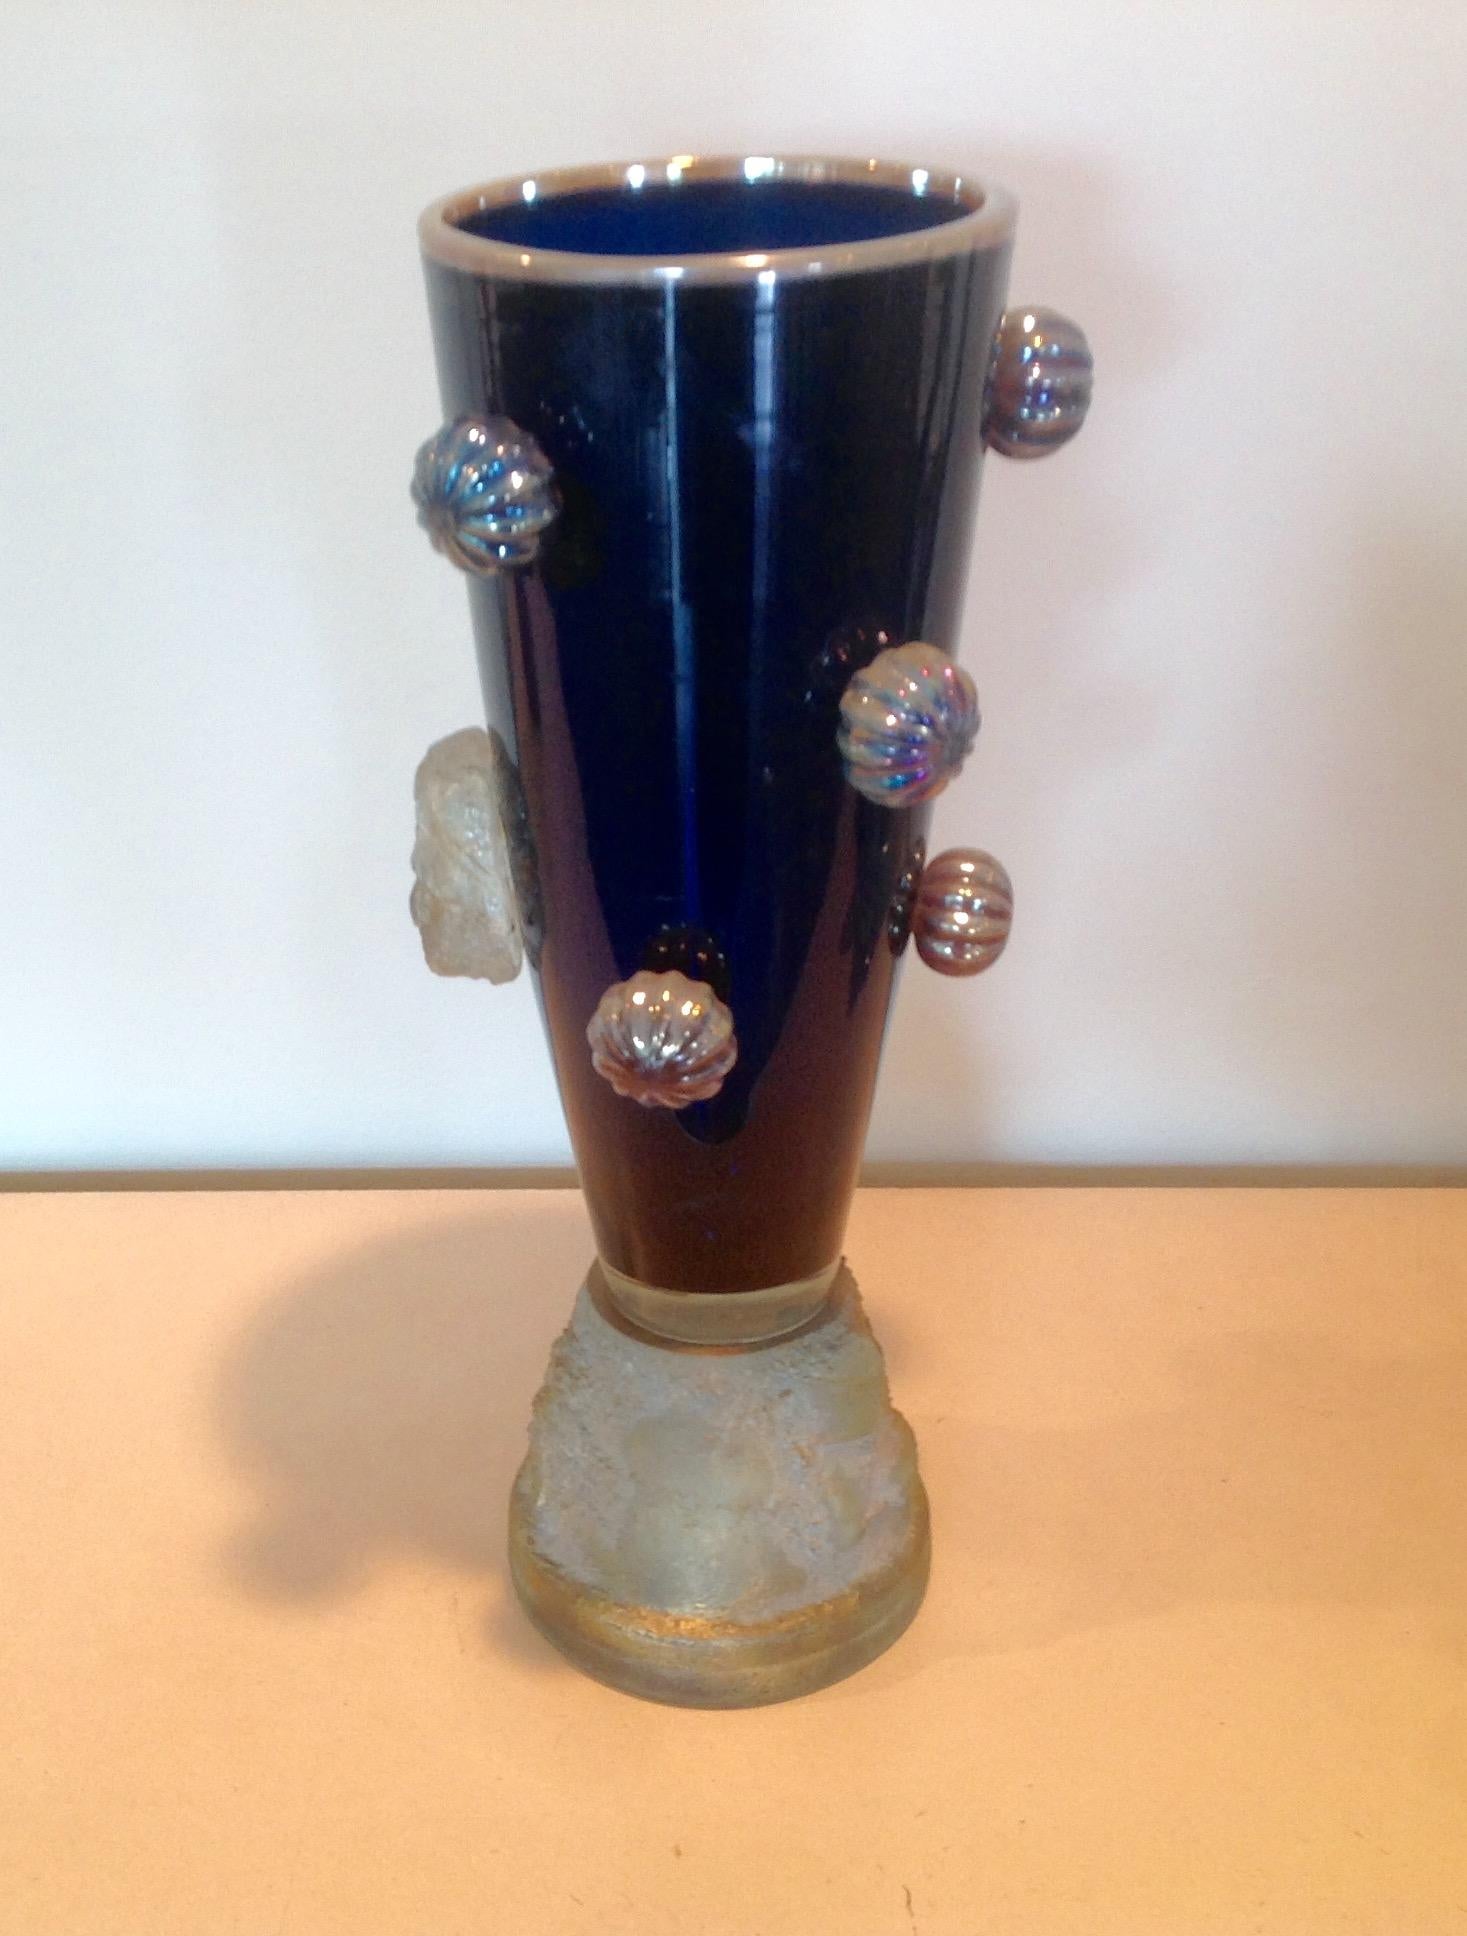 American Large Studio Glass Vase by Michell Gaudet New Orleans Artist, 1998 For Sale